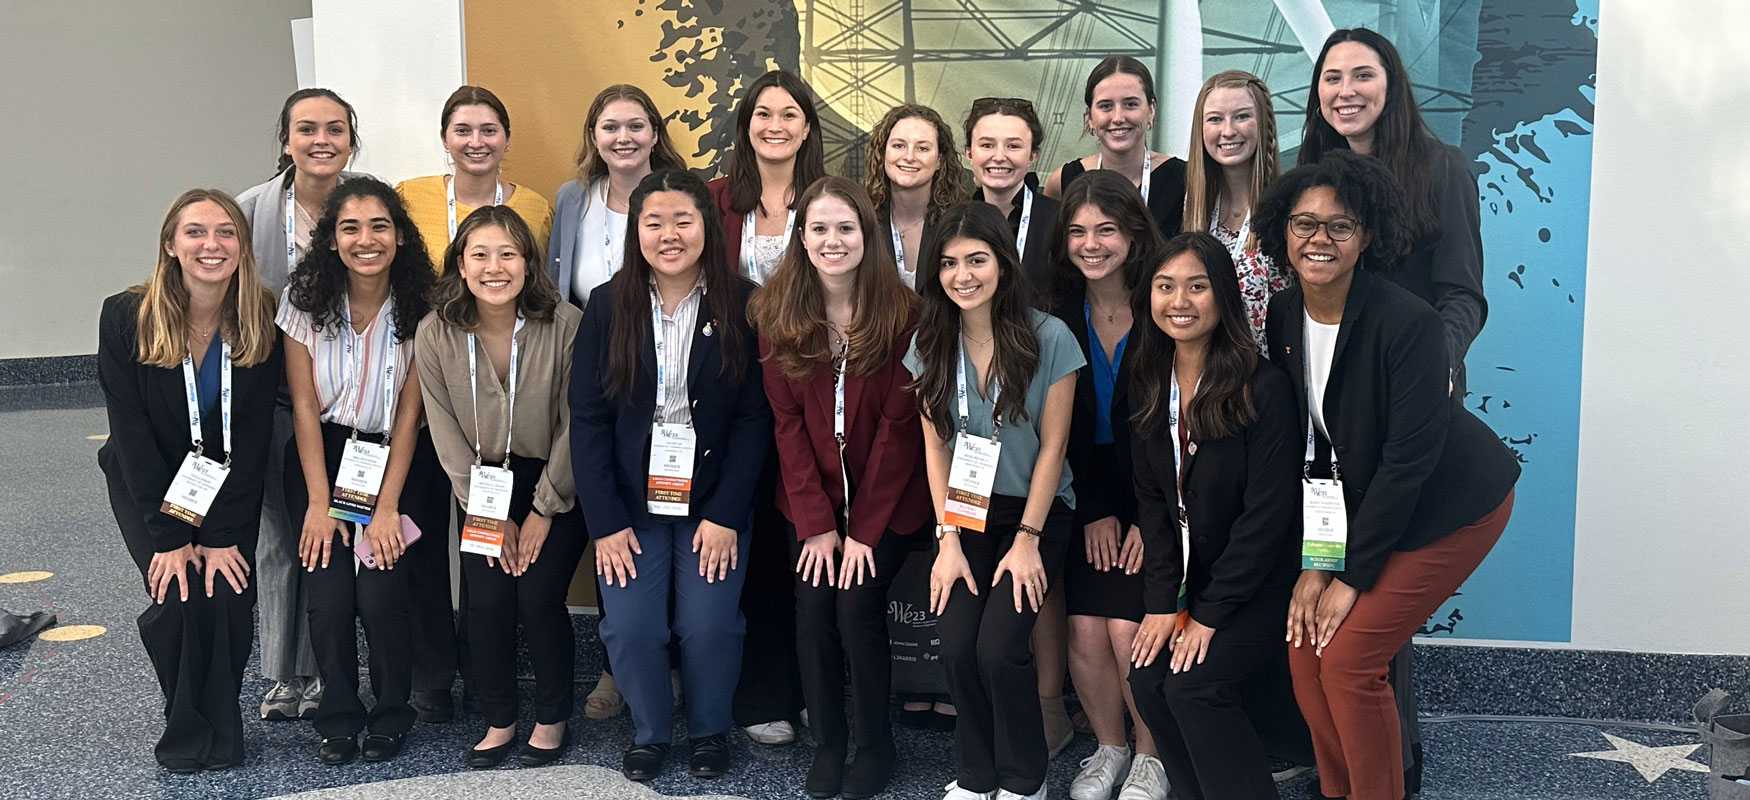 UT SWE Lived Without Limits at WE23 National Conference